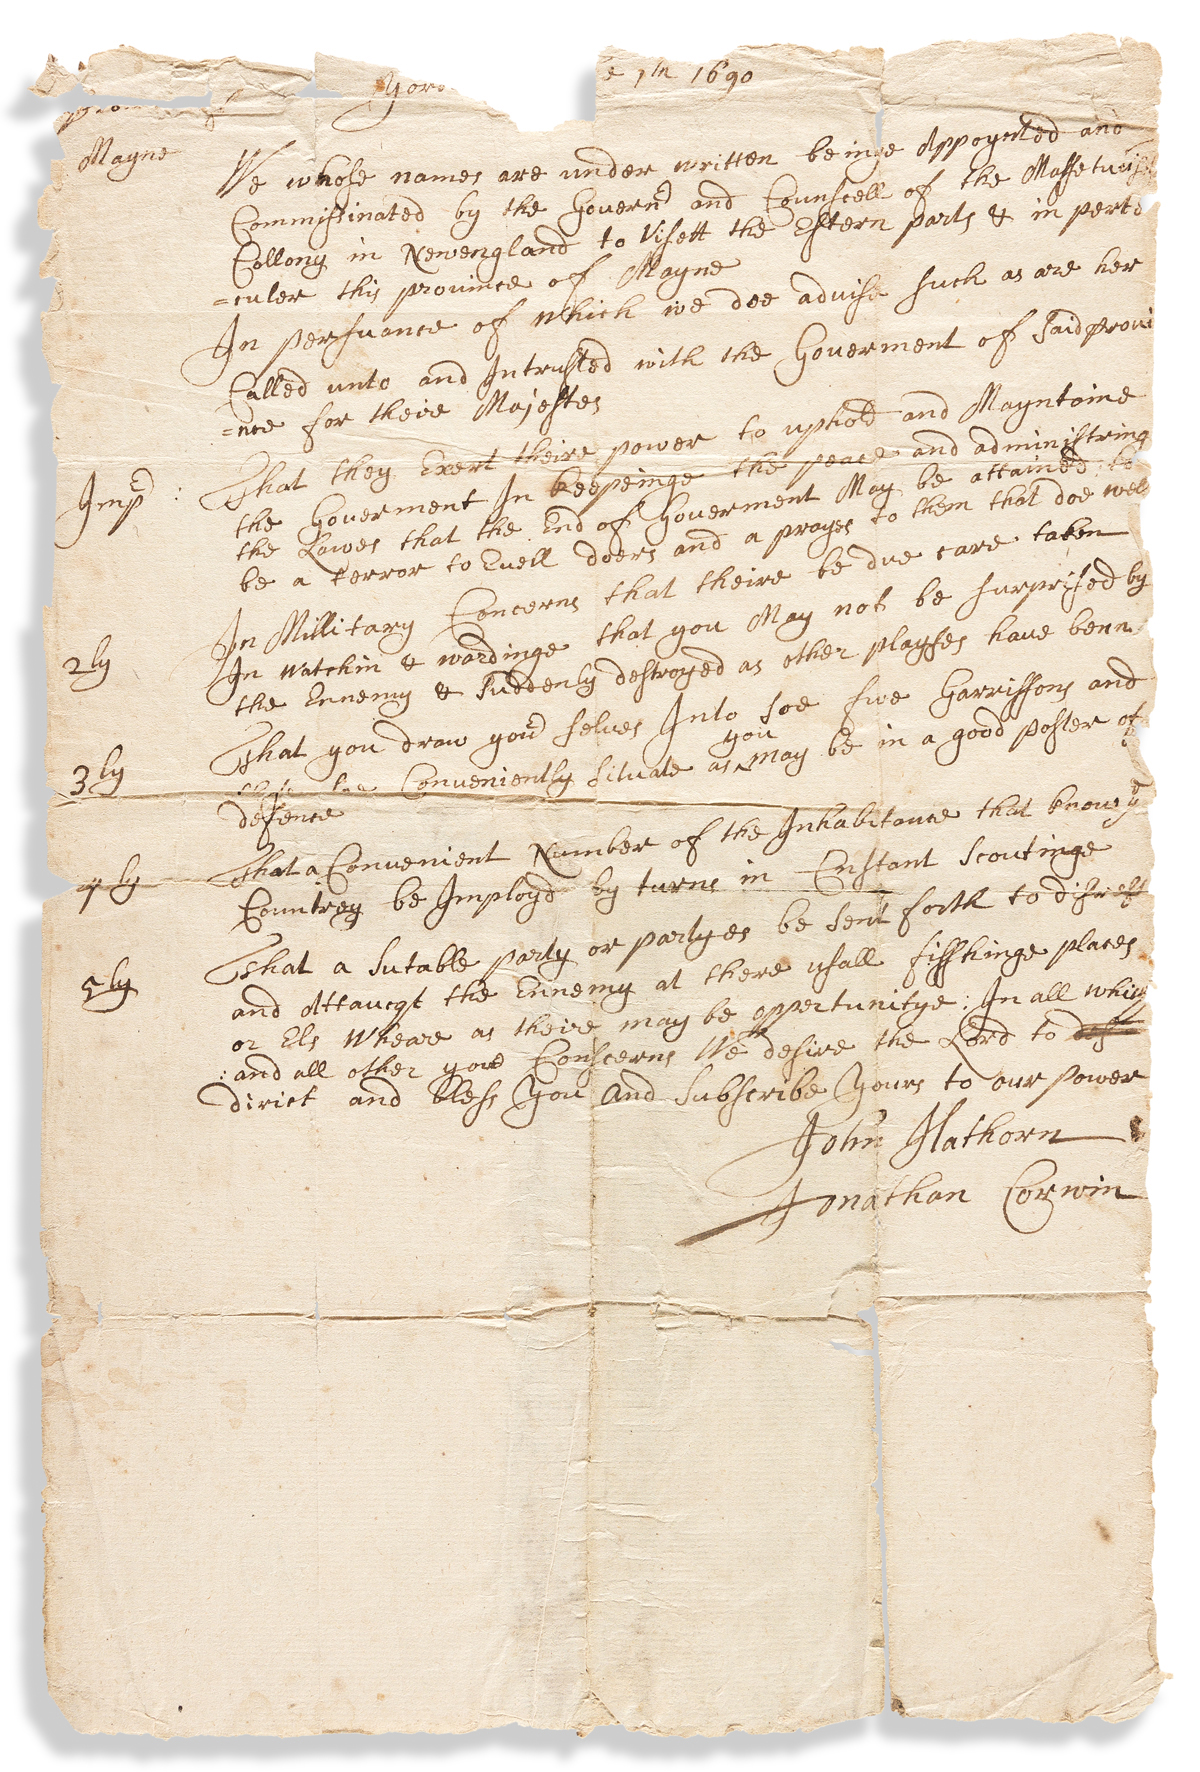 (COLONIAL WARS.) Order regarding protection of the Maine frontier, from two future Salem witch trial judges.